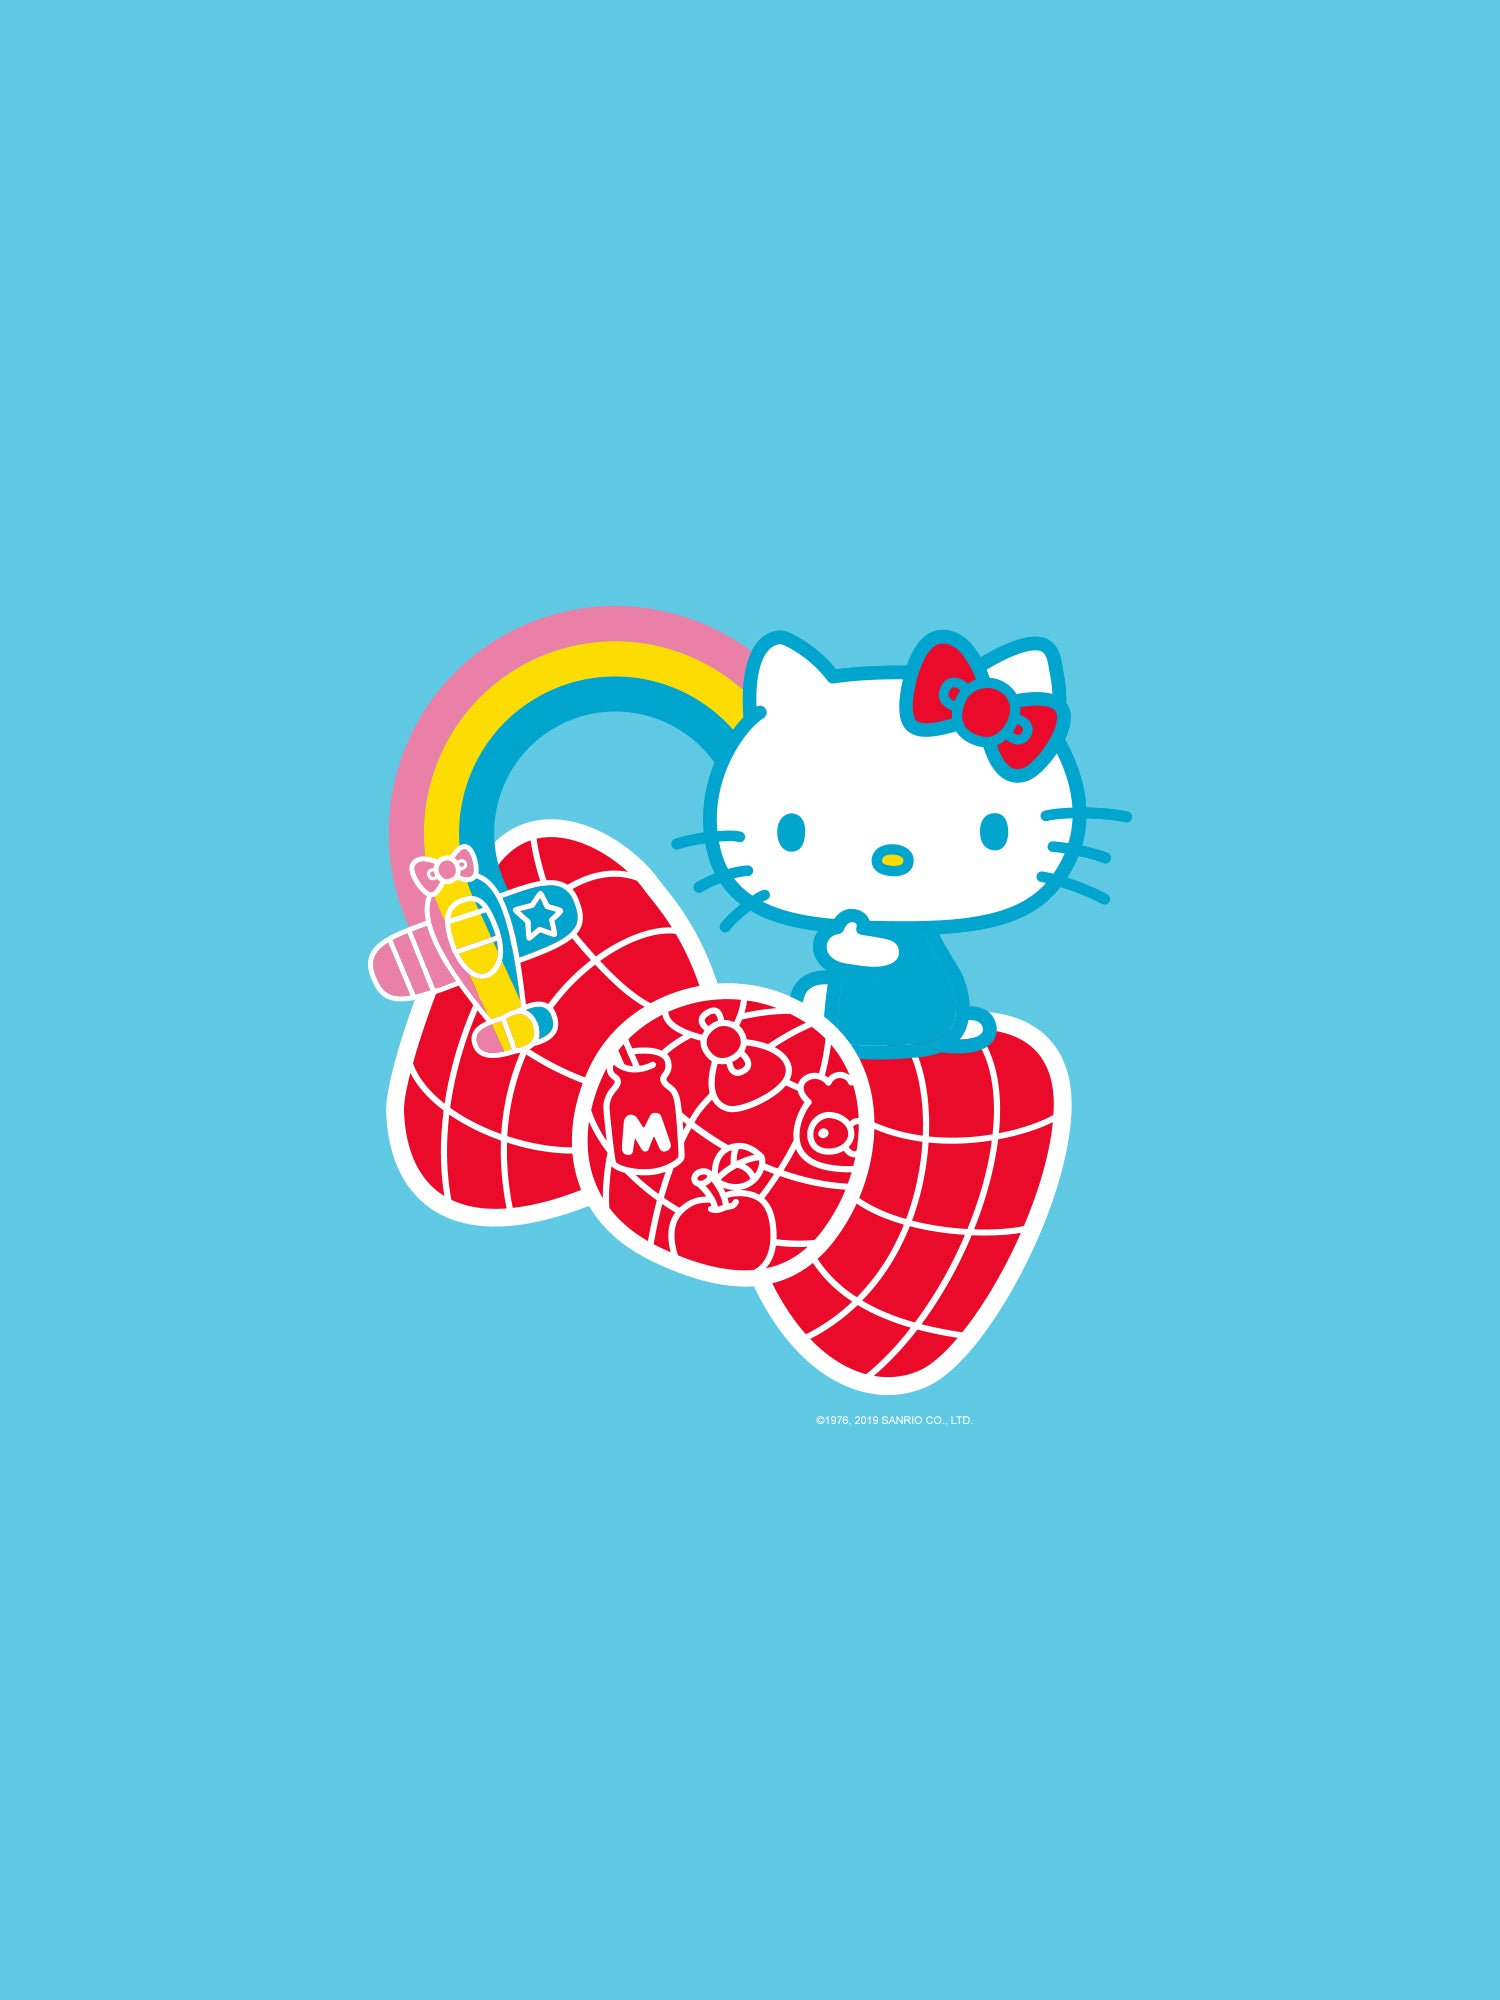 Share more than 60 hello kitty wallpaper blue latest - in.cdgdbentre